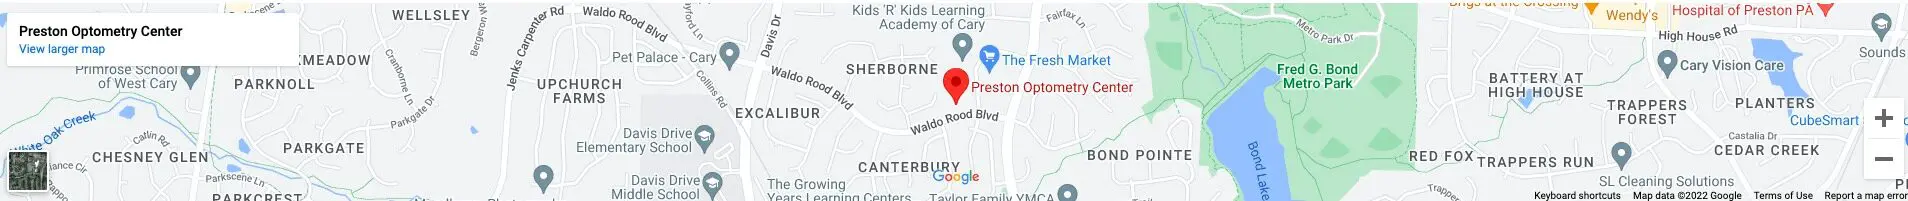 A map of the location of the children 's learning academy.